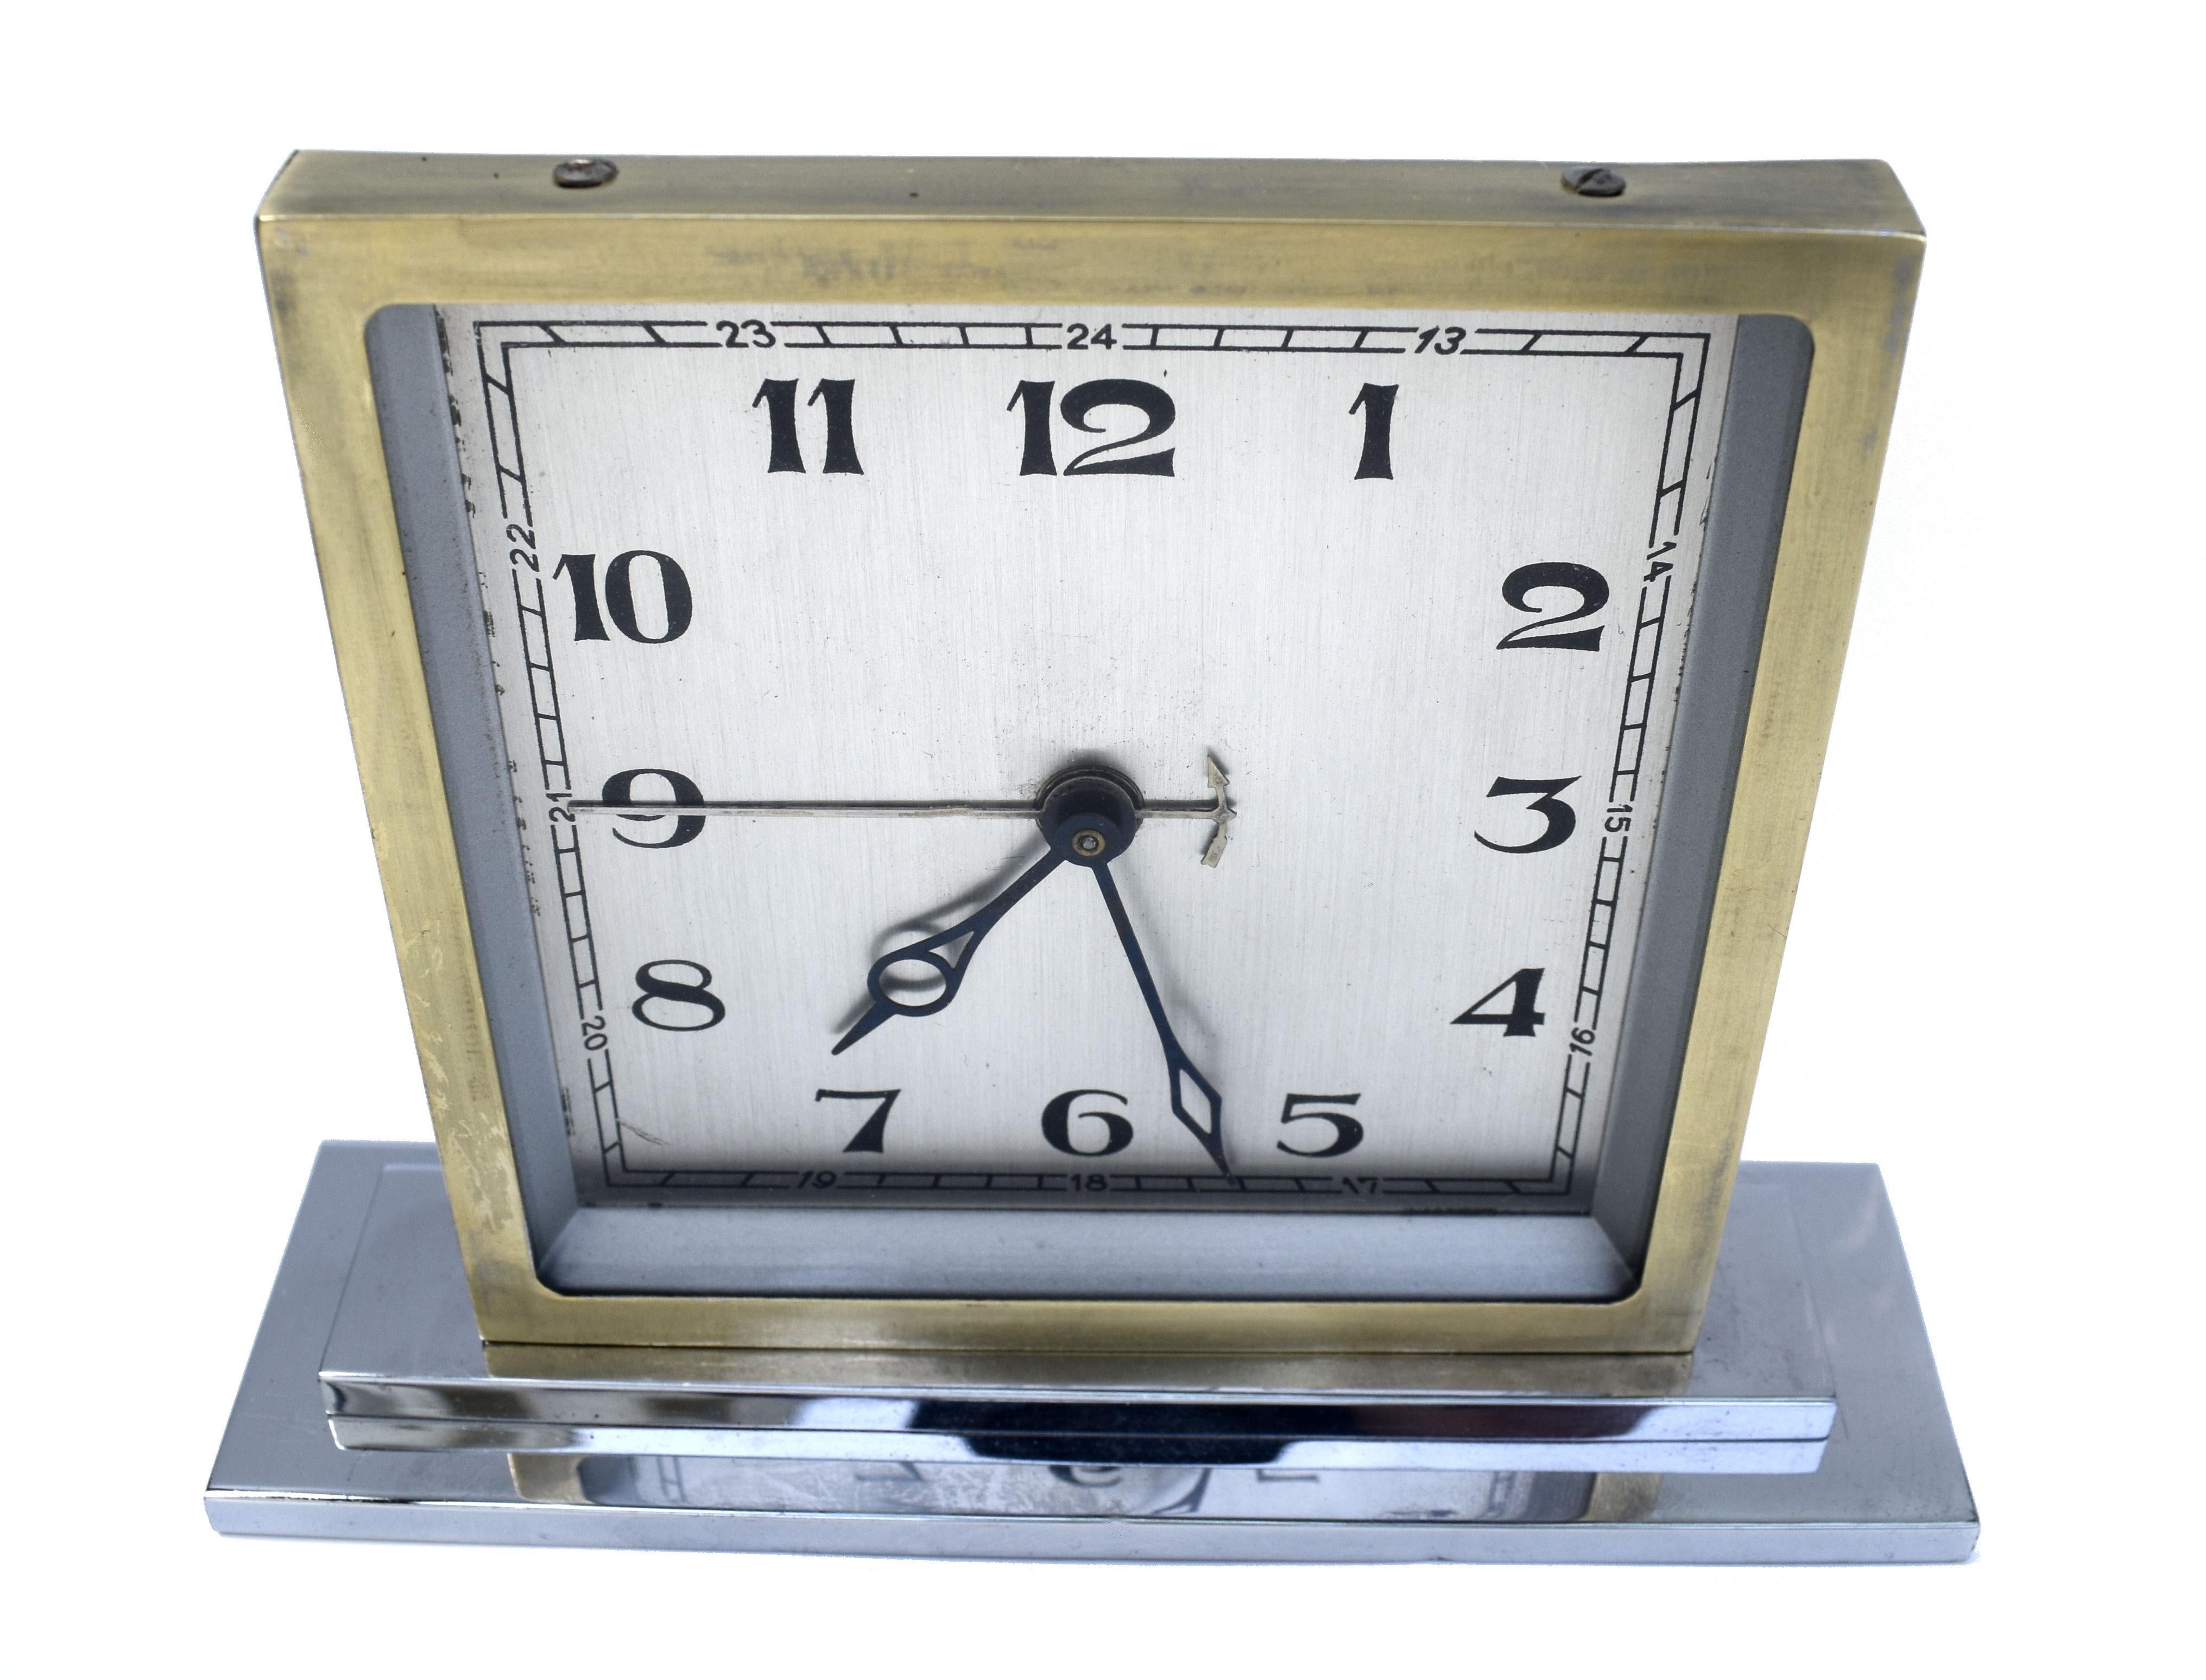 Free standing Chrome Art Deco table/ desk clock. Wind up manual 30 hr movement which has been serviced and so comes to you in good working condition. Cosmetically It's in very good vintage condition for its 90 odd years, the chrome is as bright and